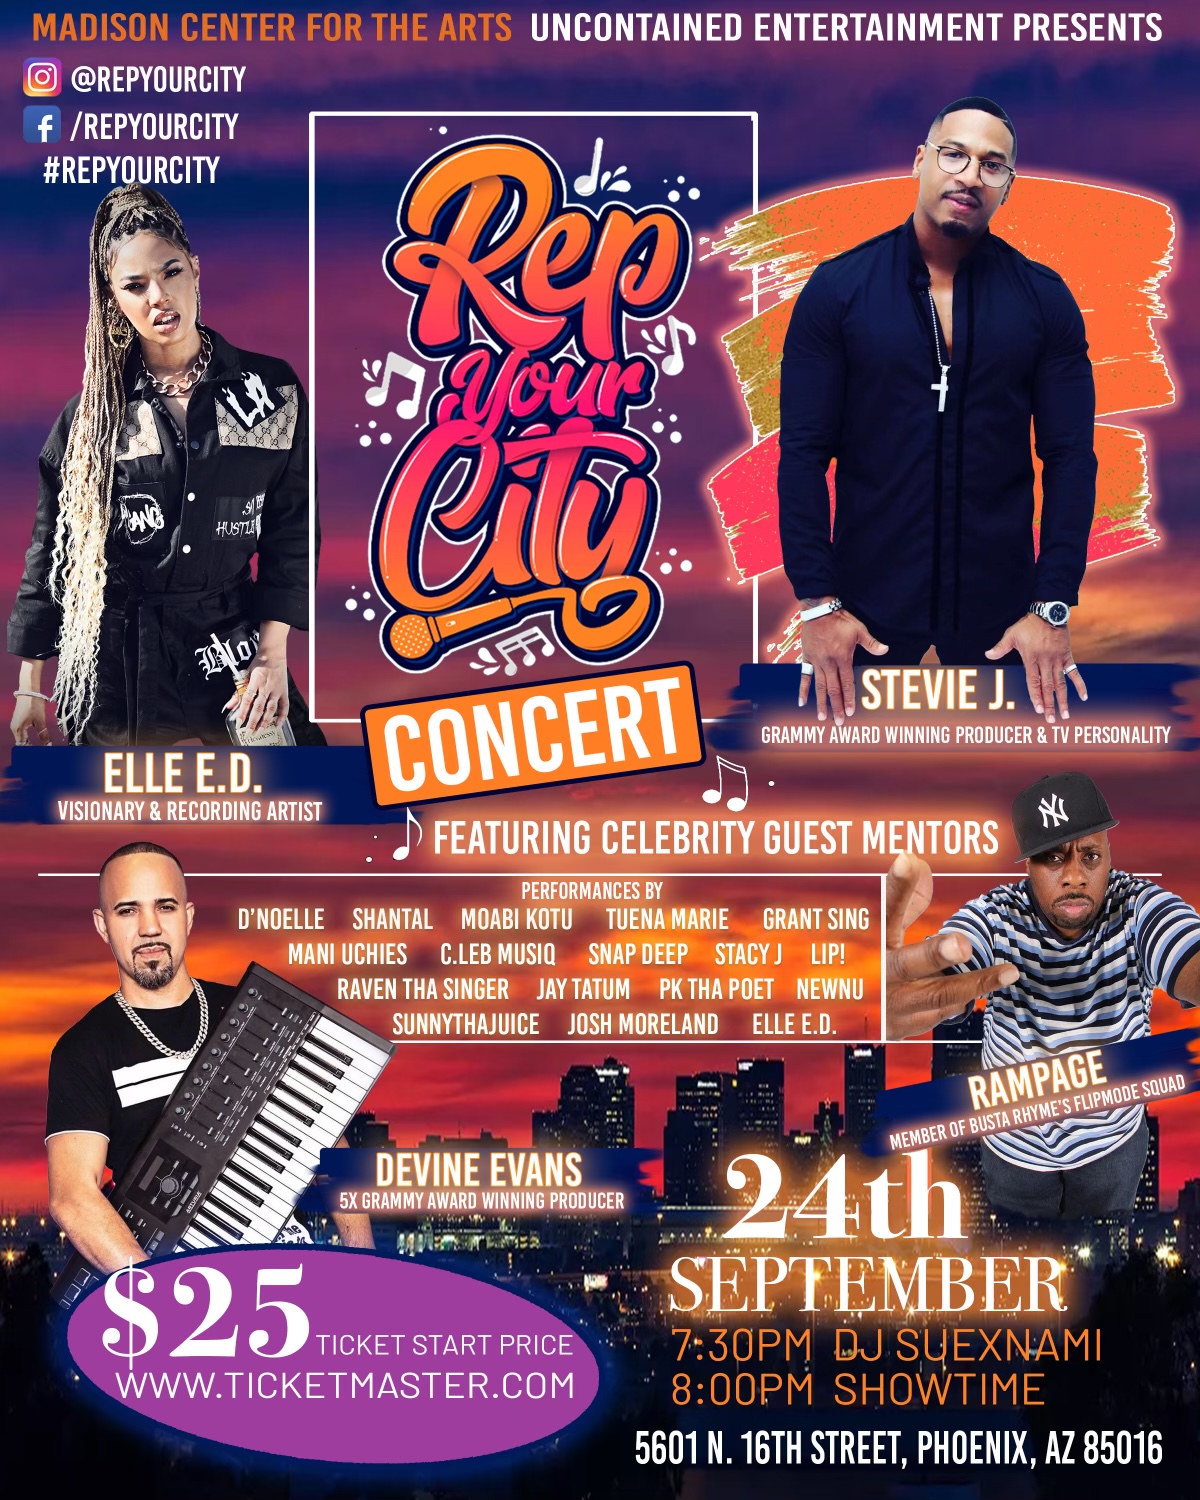 Don’t Miss the Rep Your City Concert in Phoenix on September 24